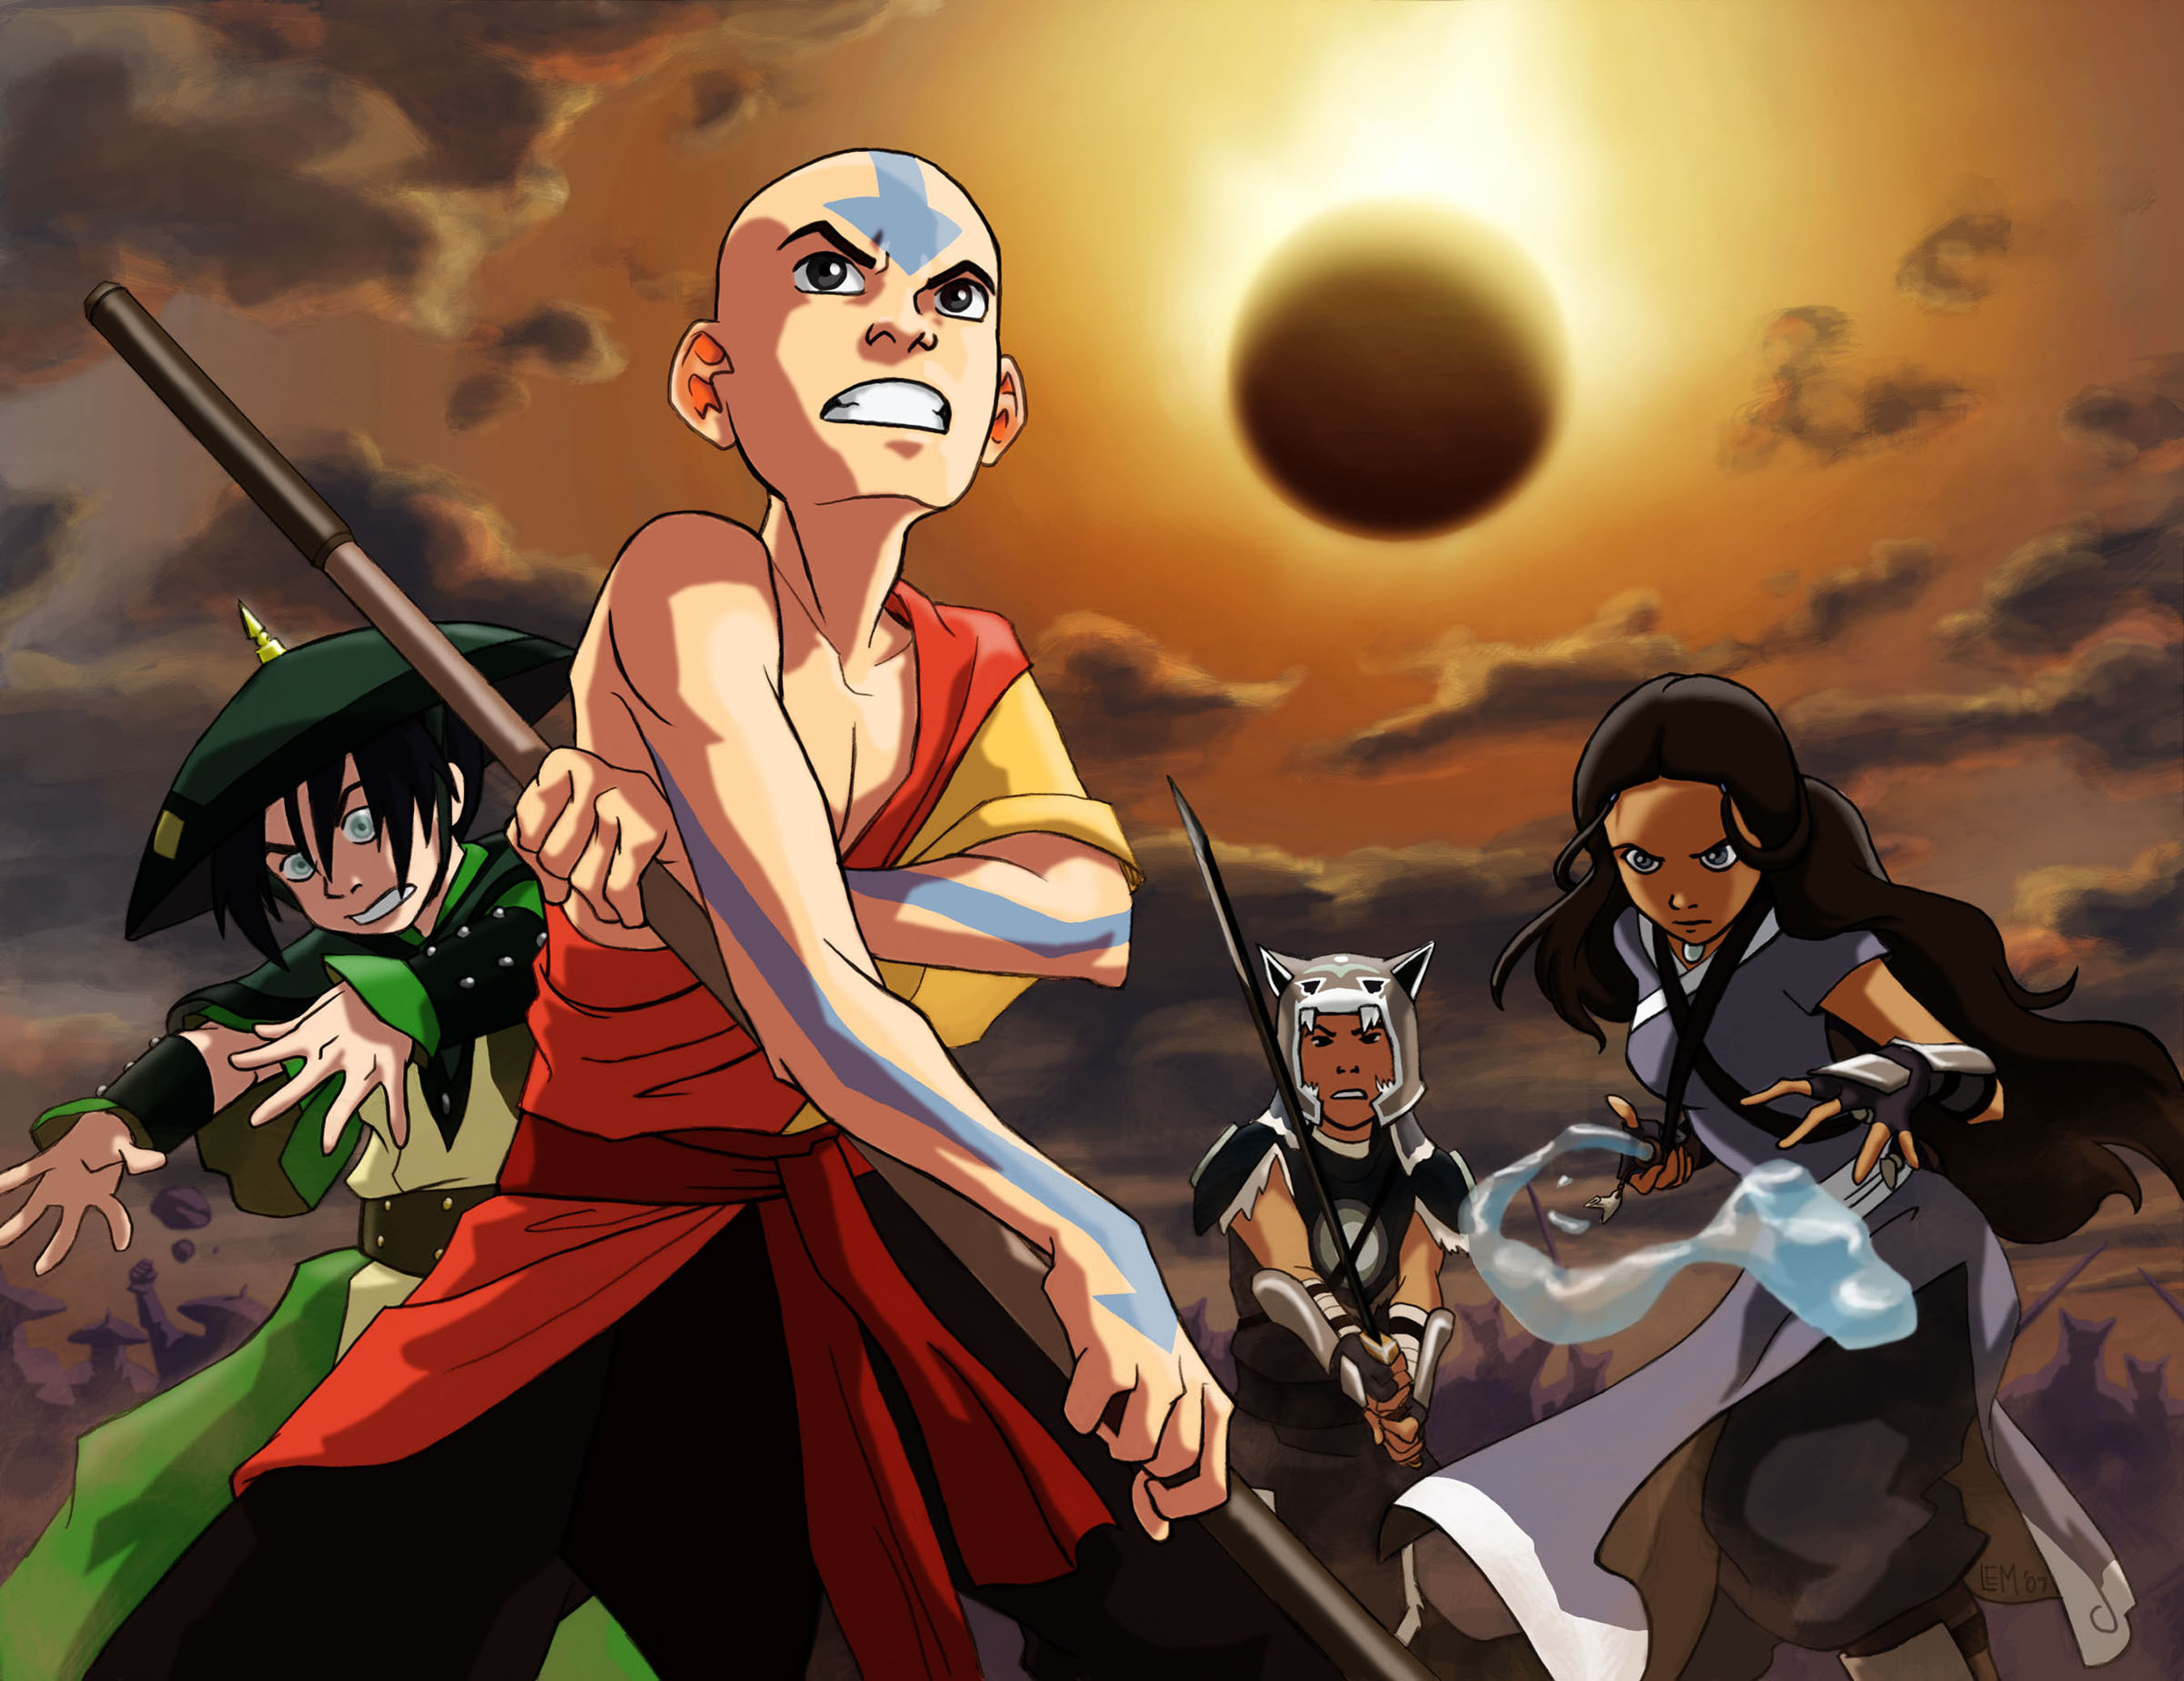 Avatar: The Last Airbender Backgrounds, Compatible - PC, Mobile, Gadgets| 2700x2078 px